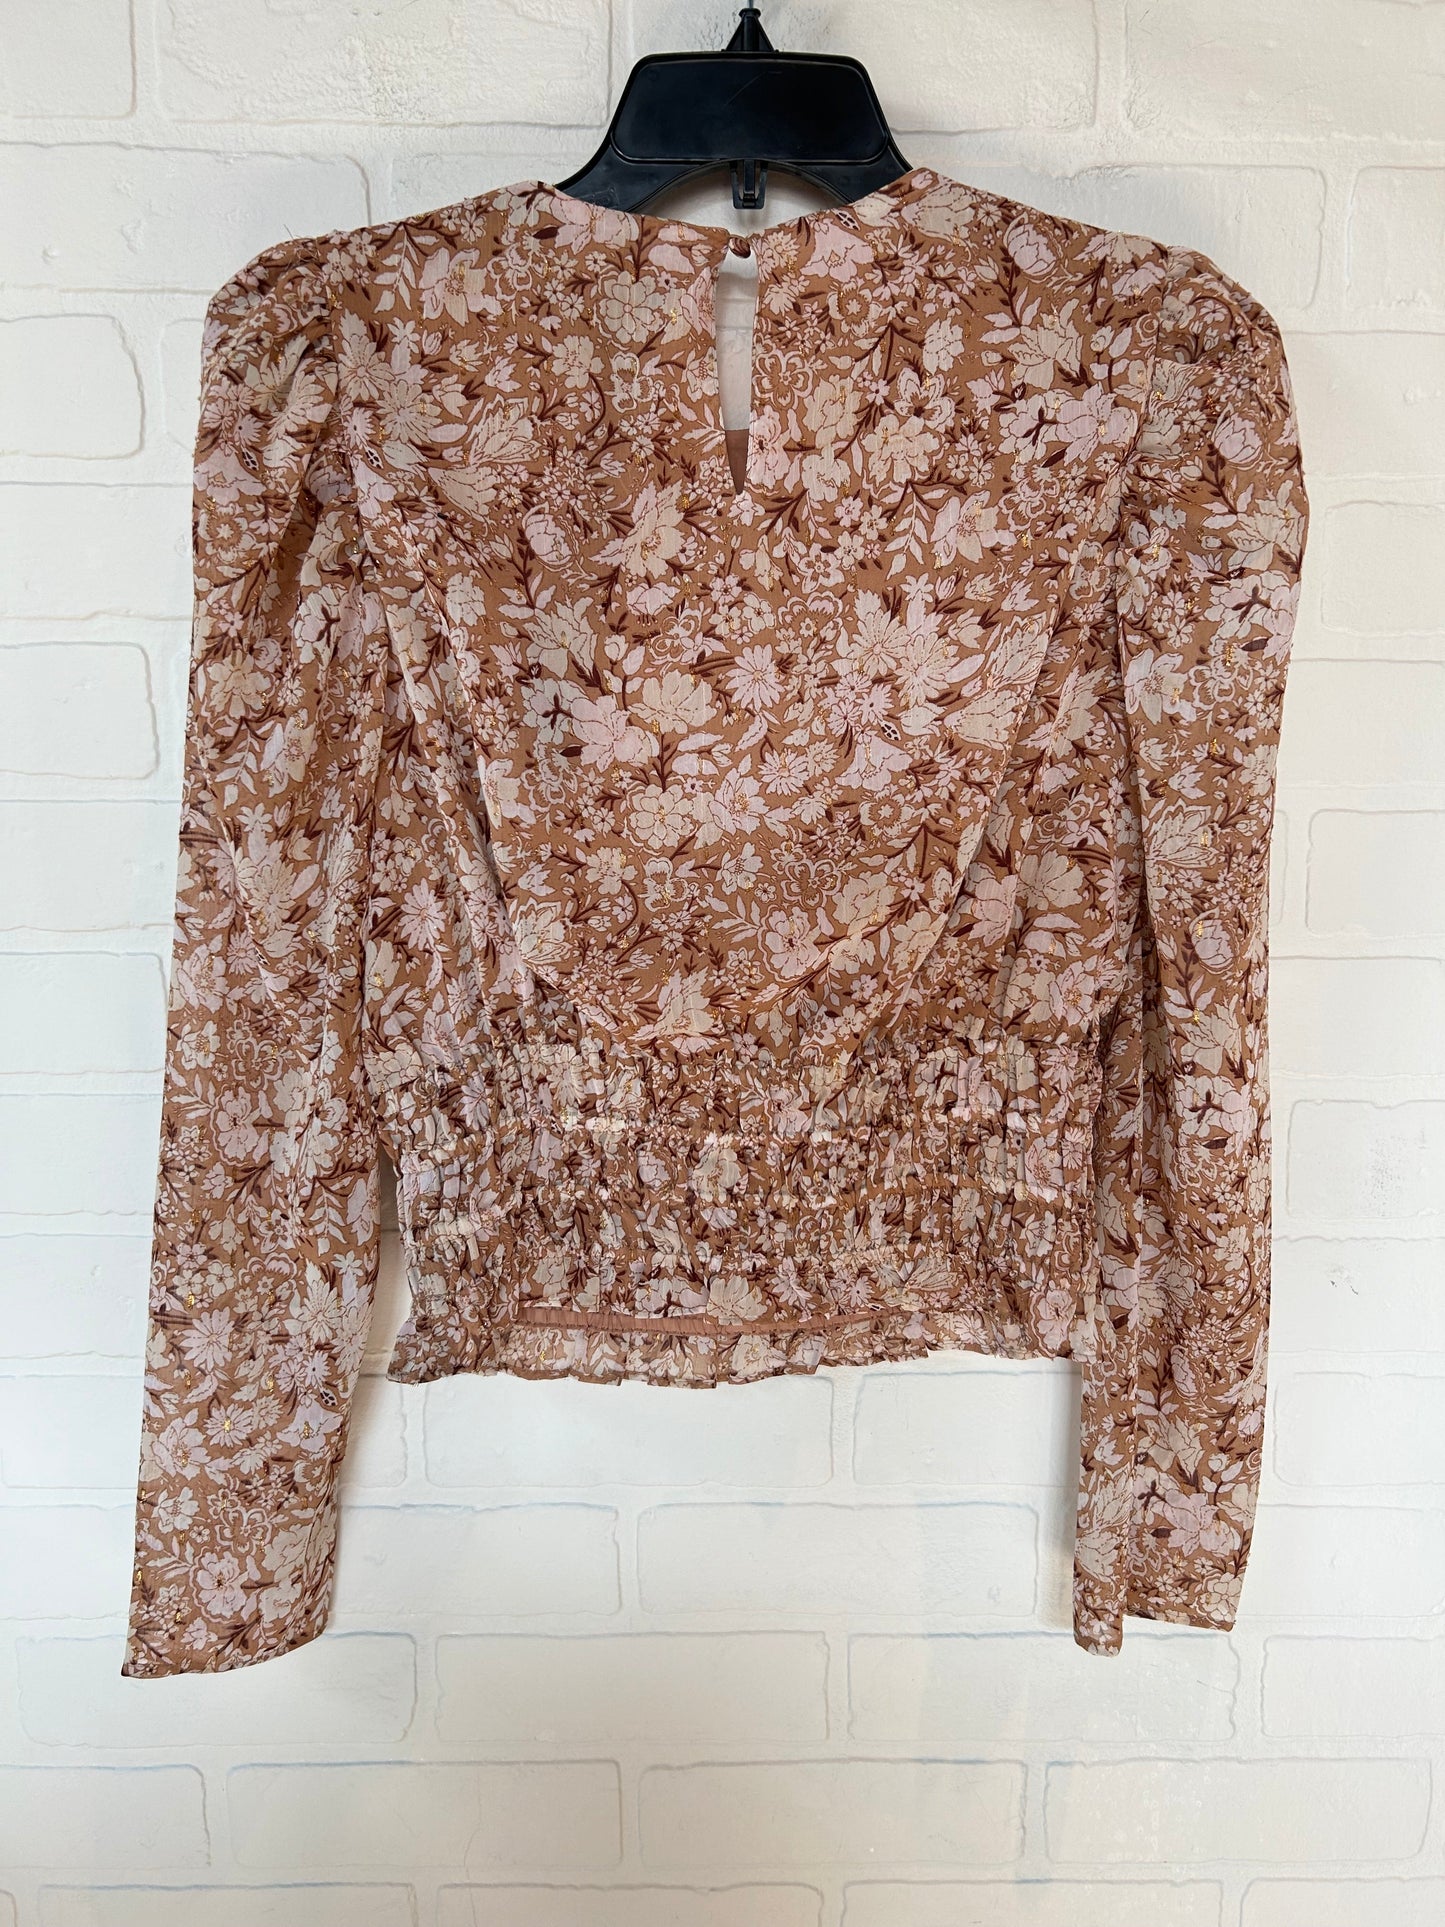 Tan & White Top Long Sleeve Express, Size S